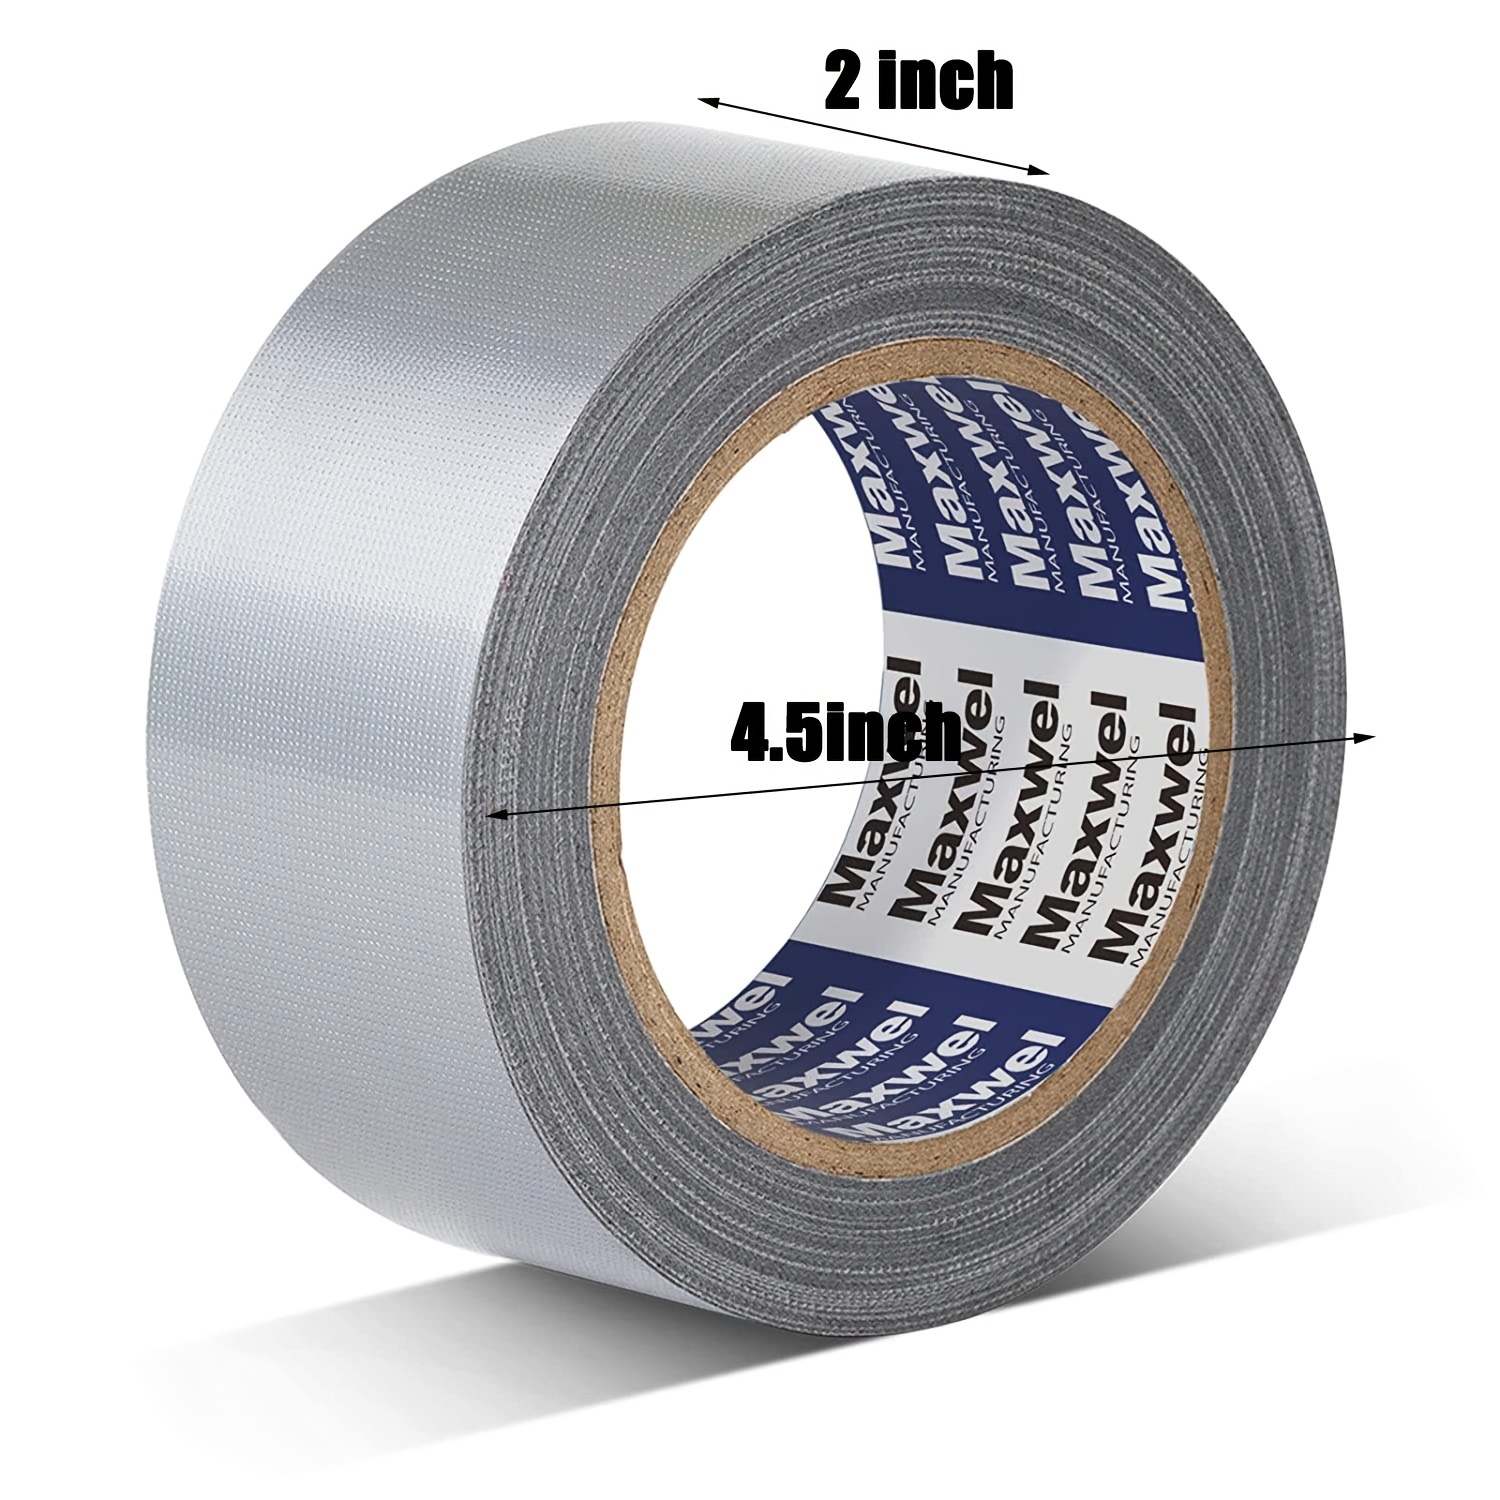 Lockport Black Duct Tape - 3 Roll Multi Pack - 20 Yards x 2 Inch - Strong,  Flexible, No Residue, All-Weather and Tear by Hand - Bulk Value for  Do-It-Yourself Repairs, Industrial